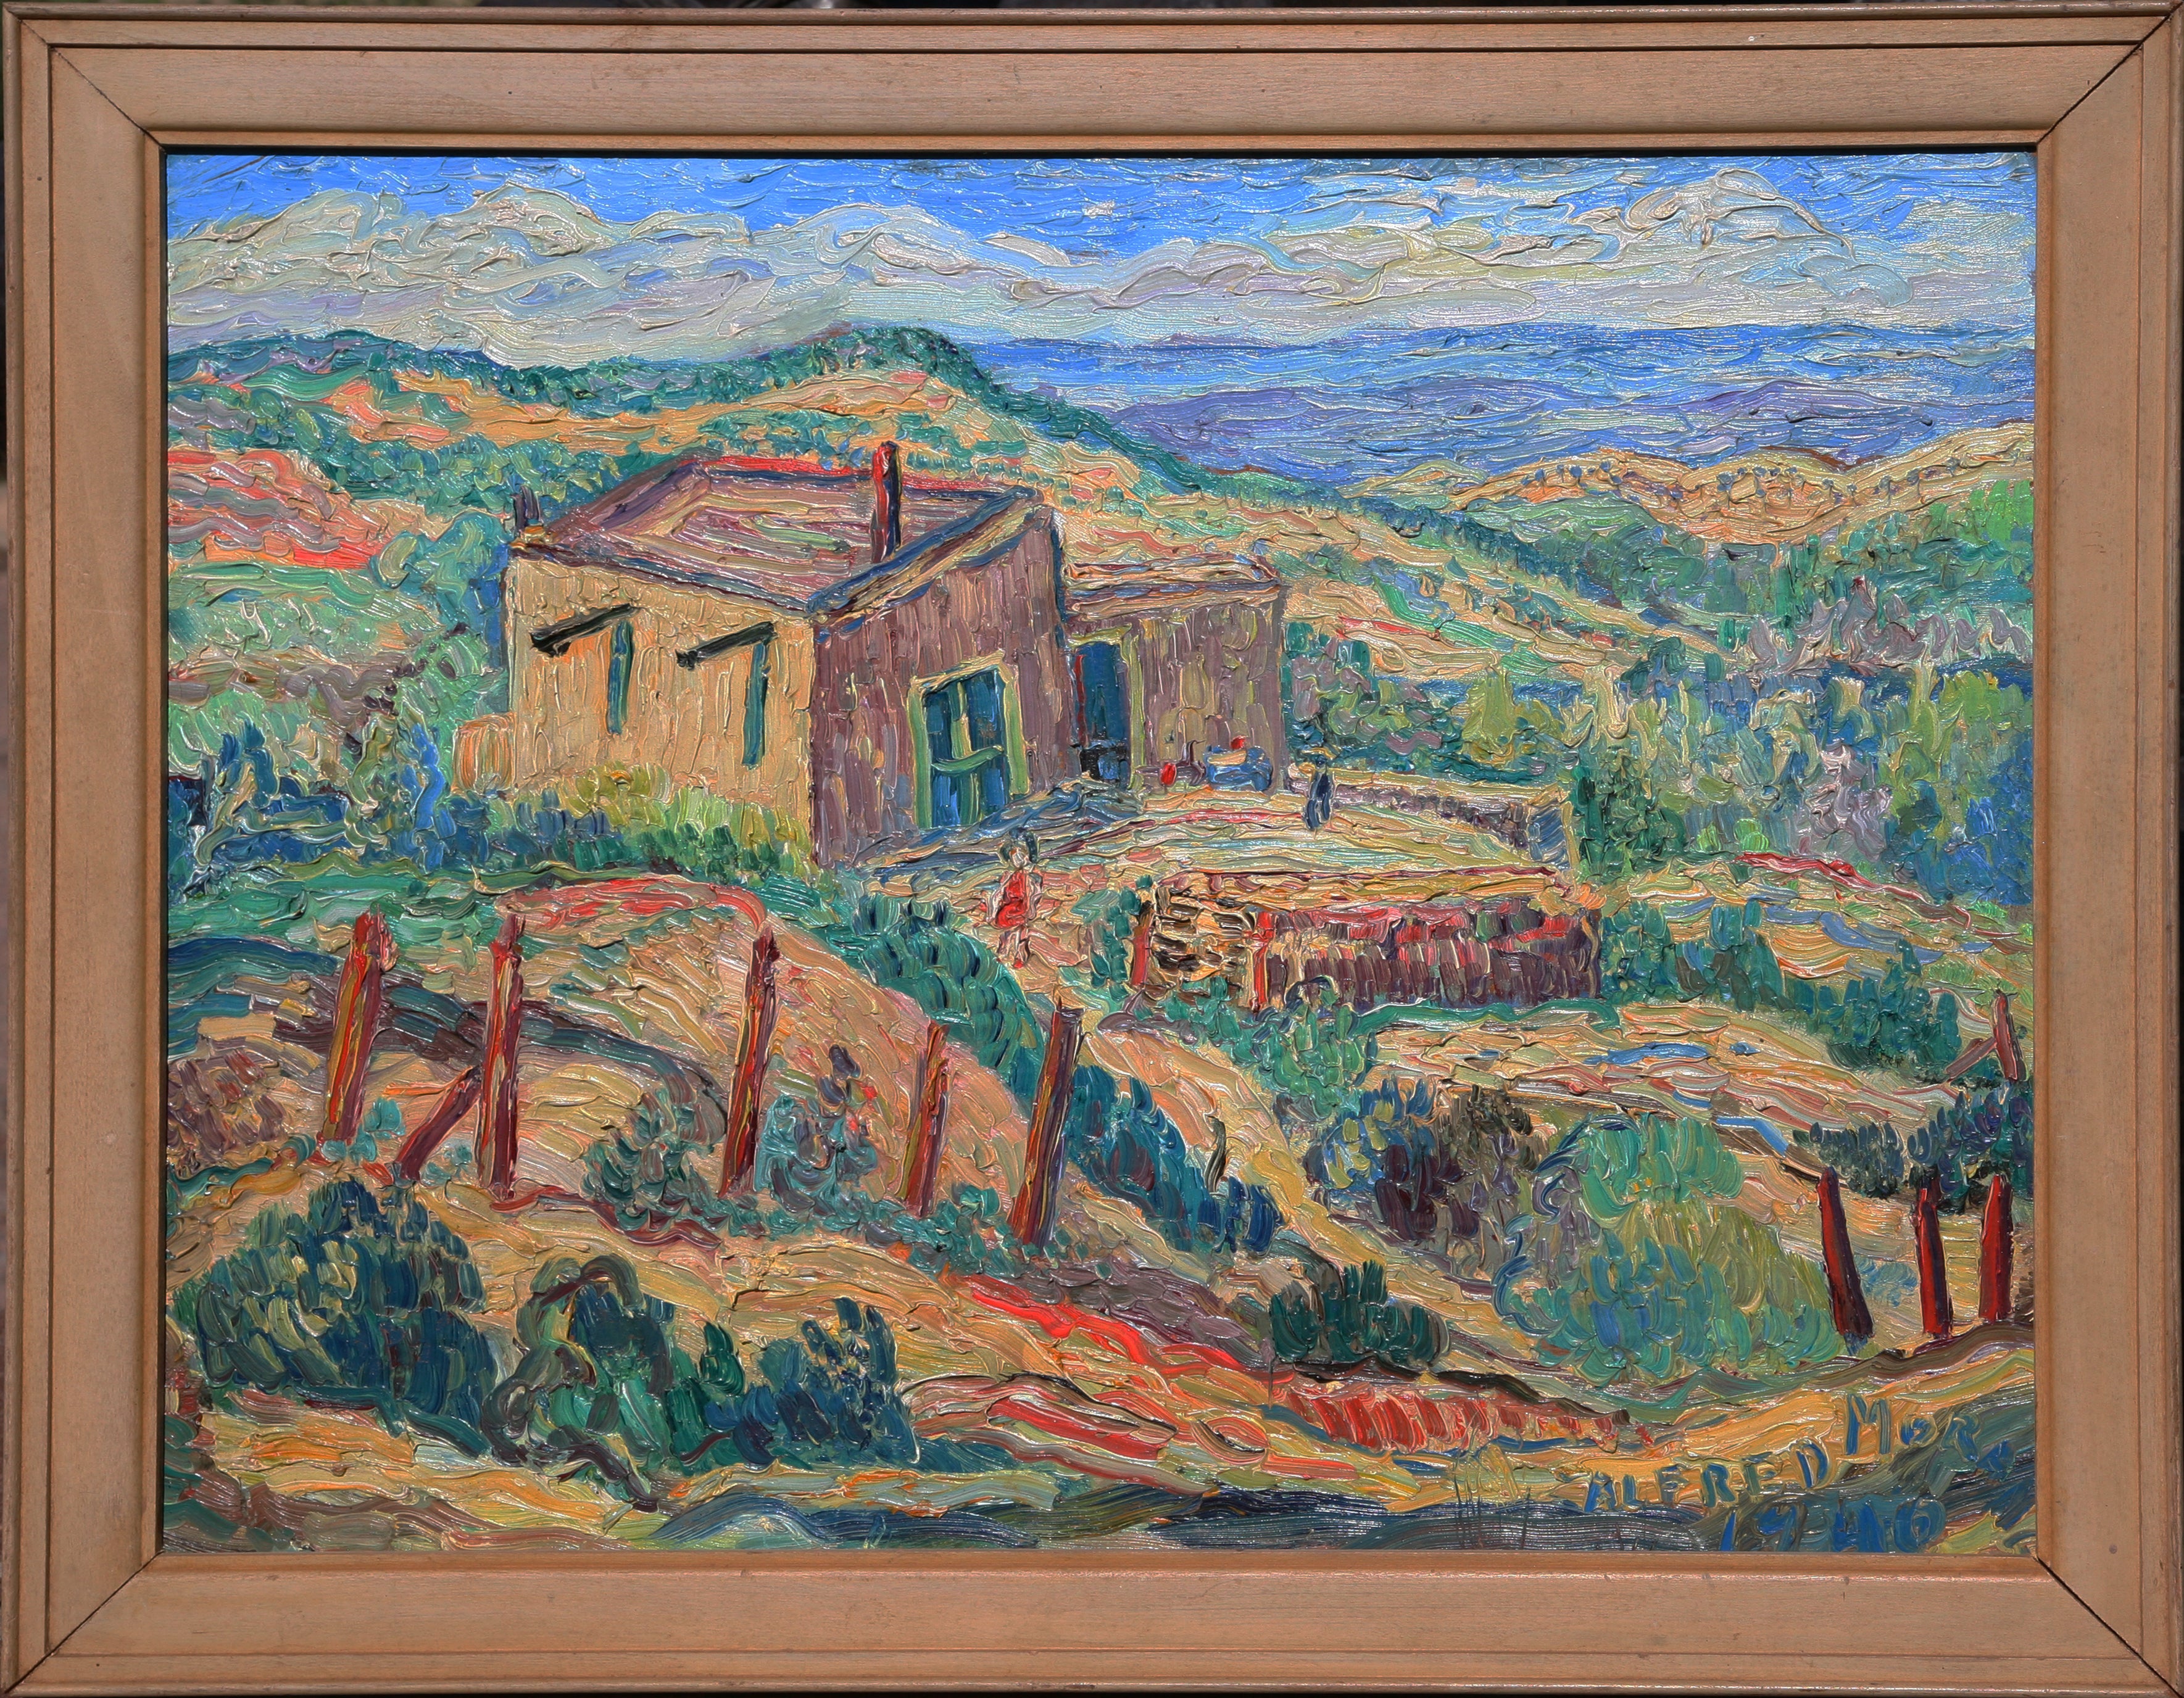 SOLD Alfred Morang 1901-1958 Green Hills of New Mexico